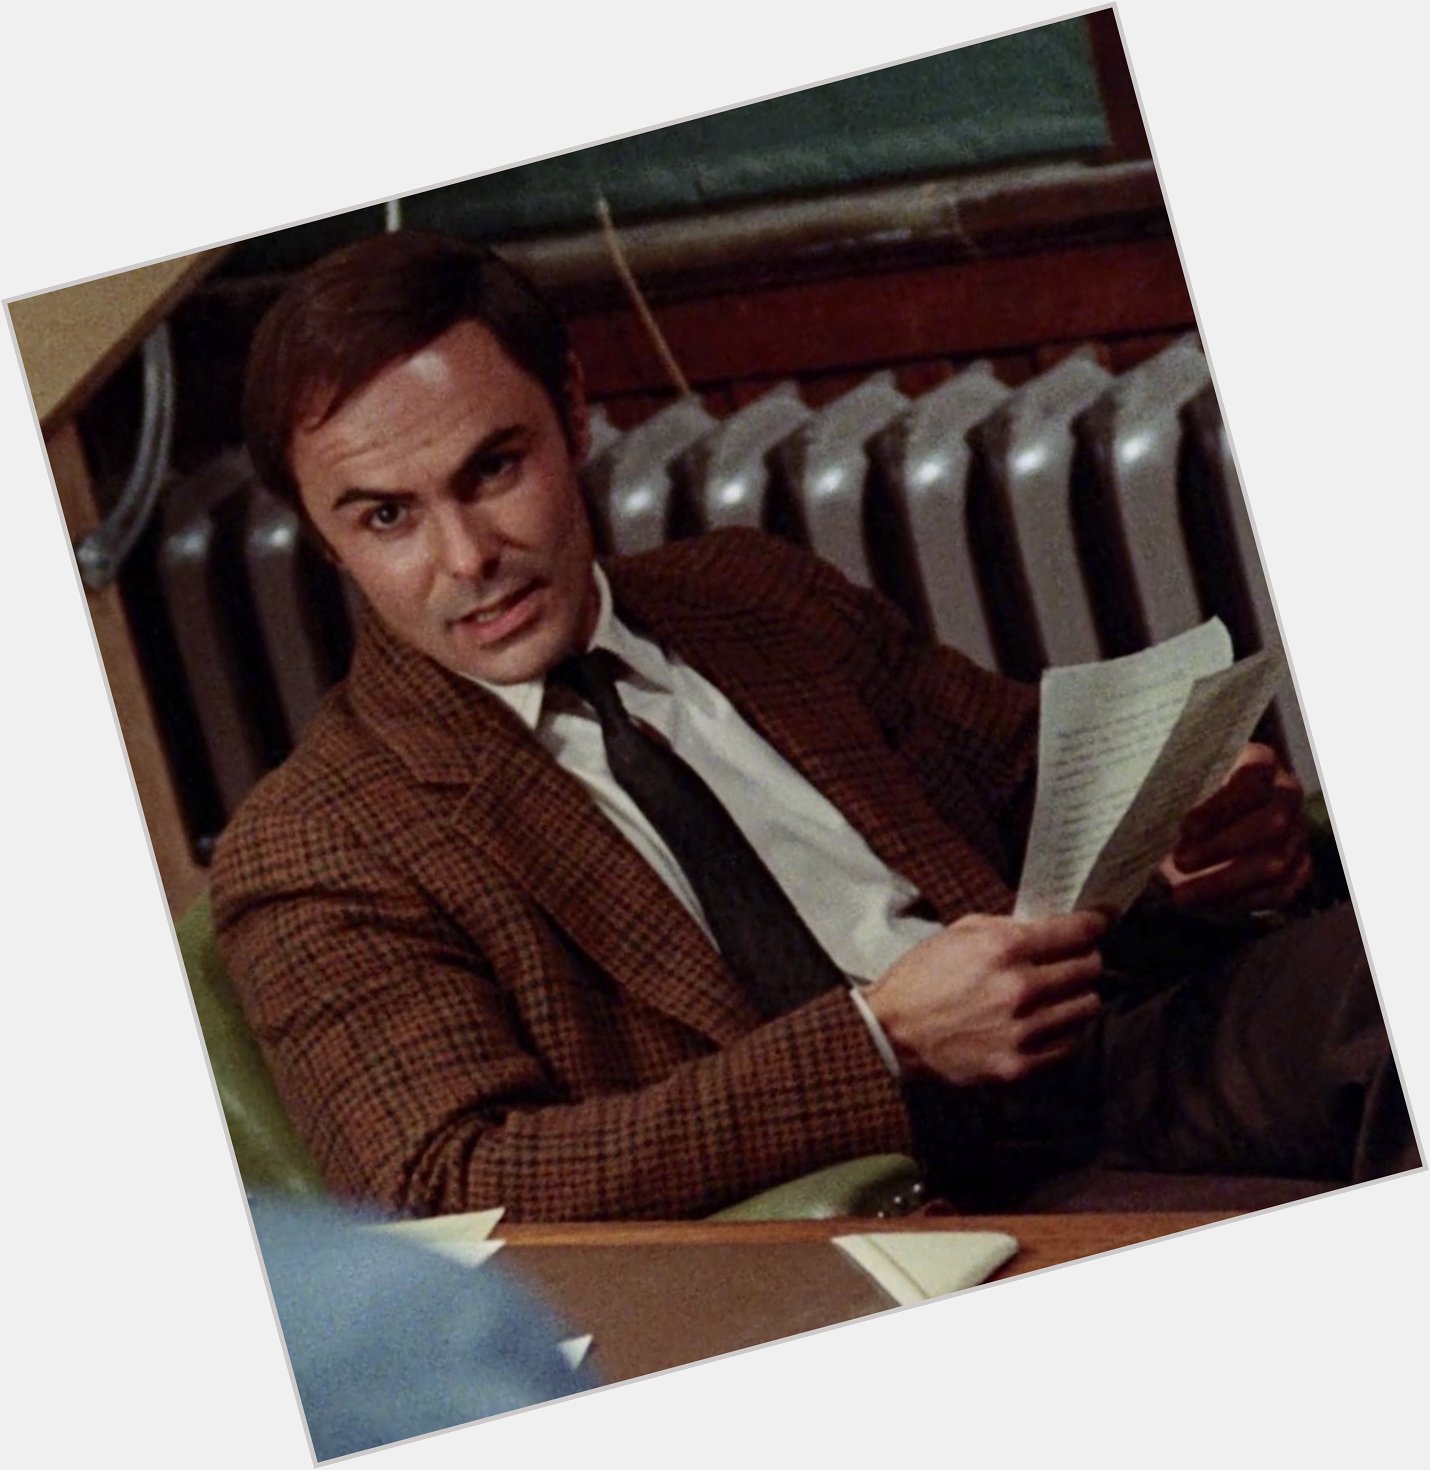 He was charm personified. And he is missed. Happy birthday, John Saxon. 